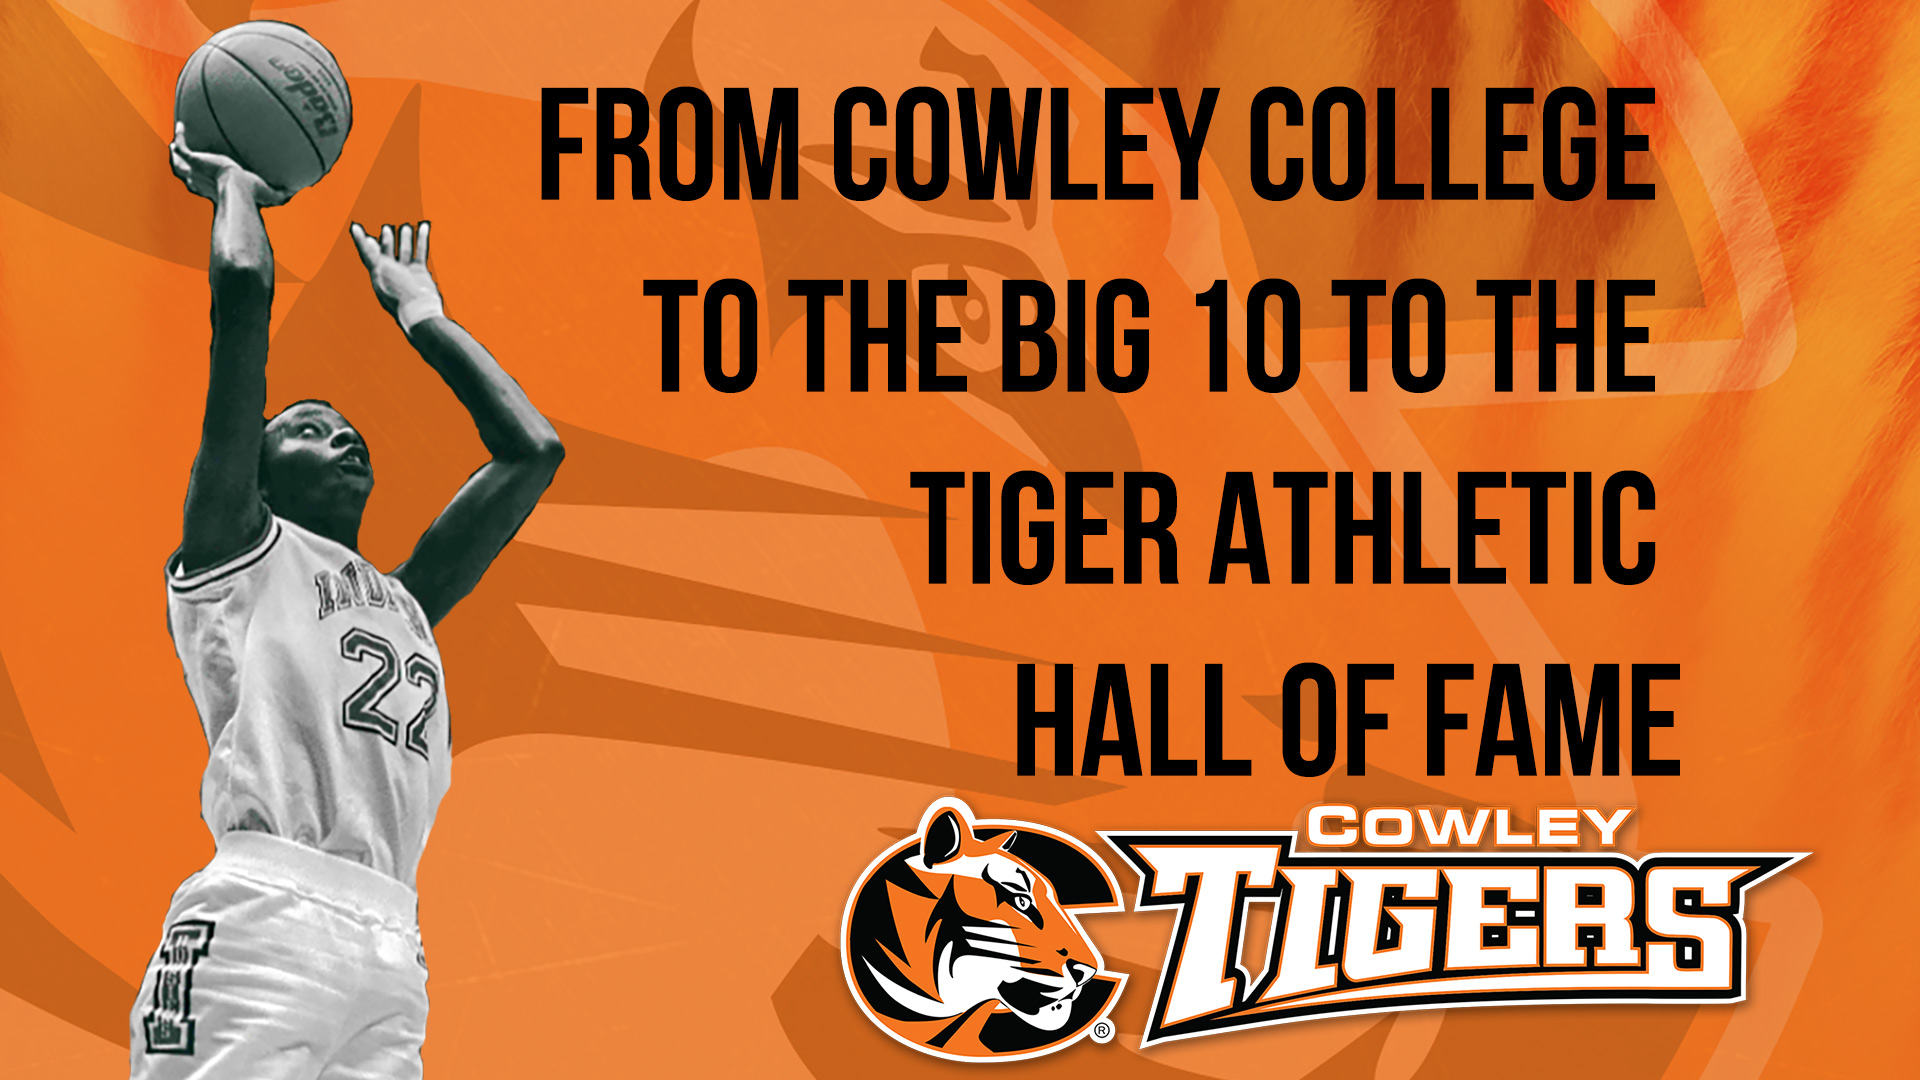 From Cowley College to the Big 10 to the Tiger Athletic Hall of Fame